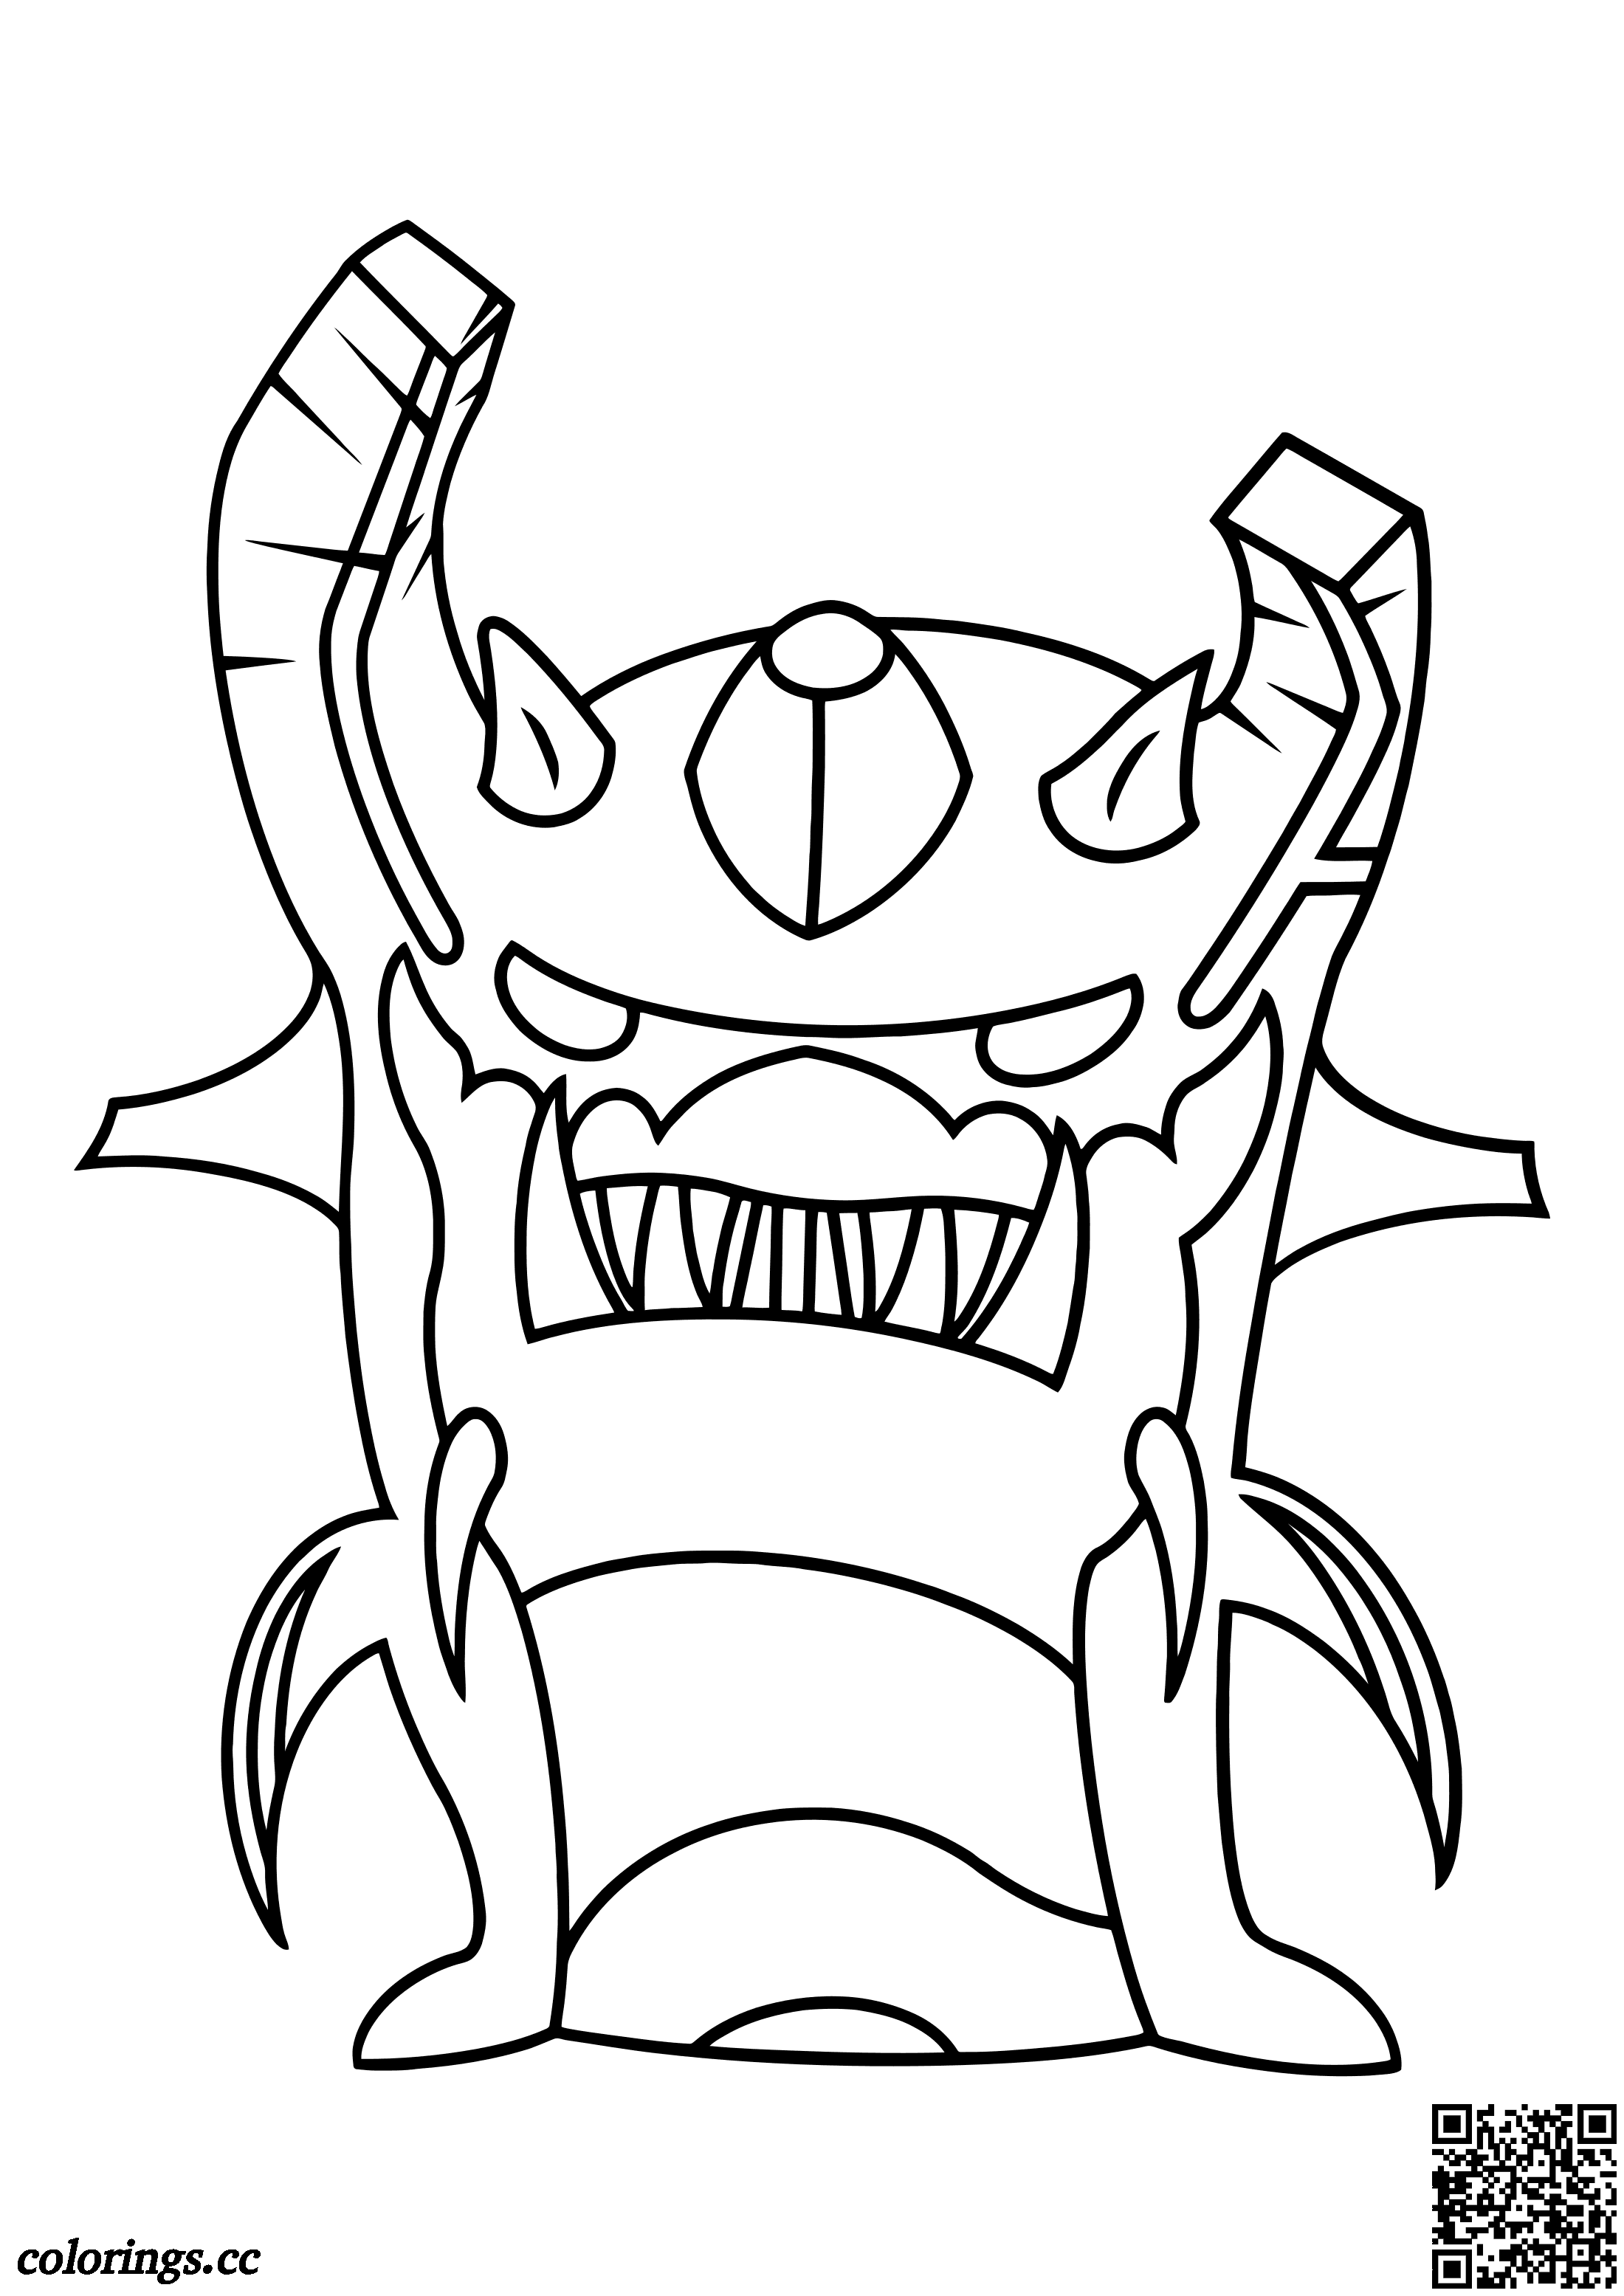 Slugterra Coloring Pages - Best Images Hight Quality. earth elemental ghoul...